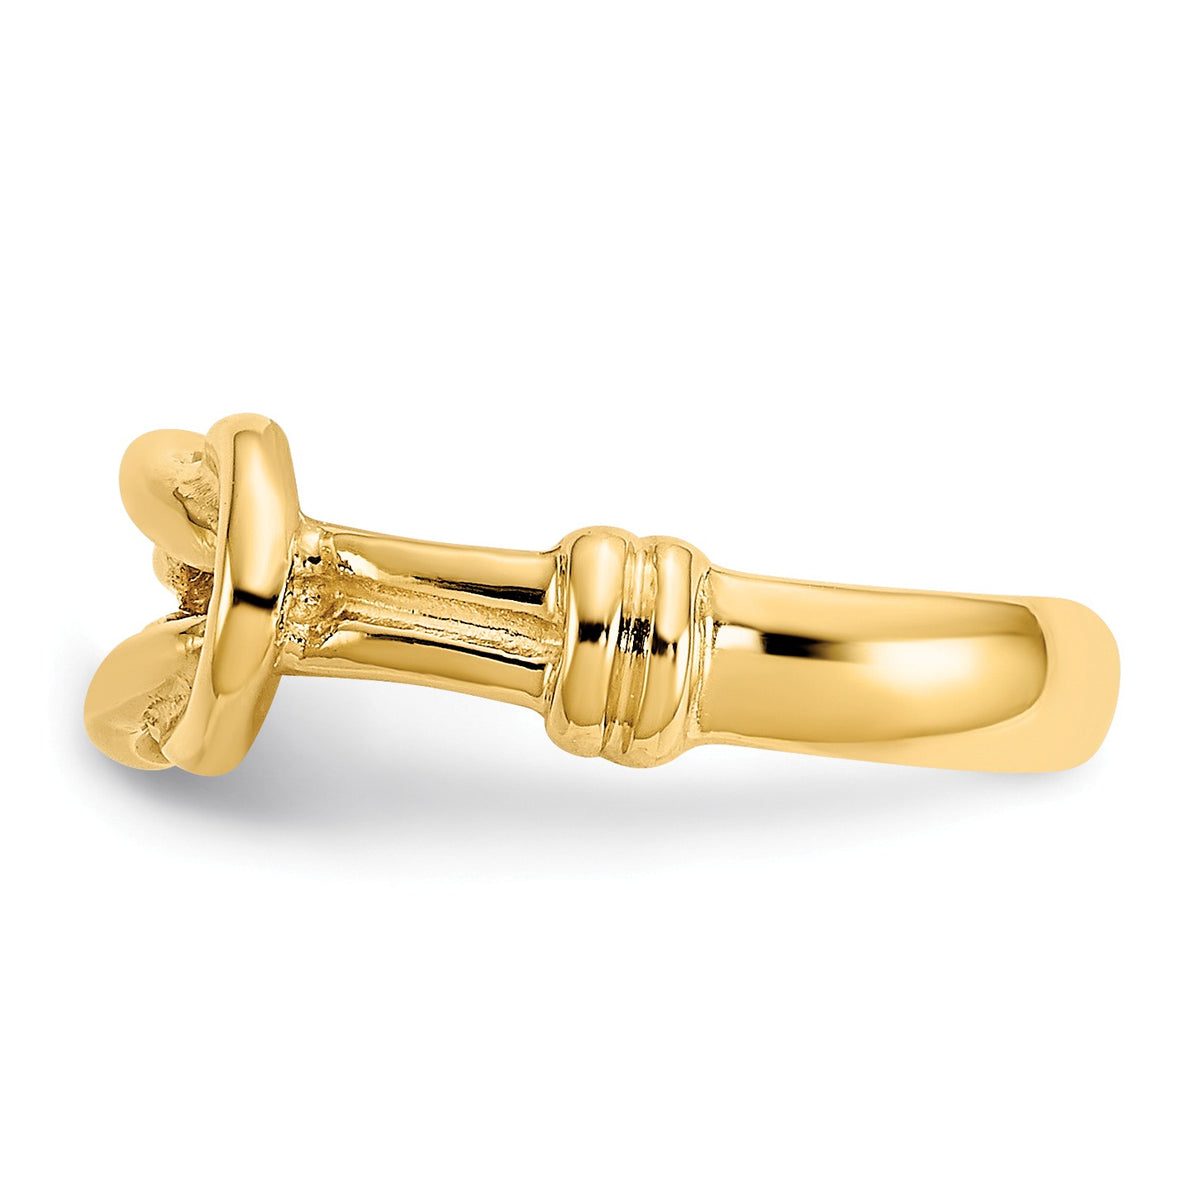 Alternate view of the Love Knot Toe Ring in 14 Karat Gold by The Black Bow Jewelry Co.